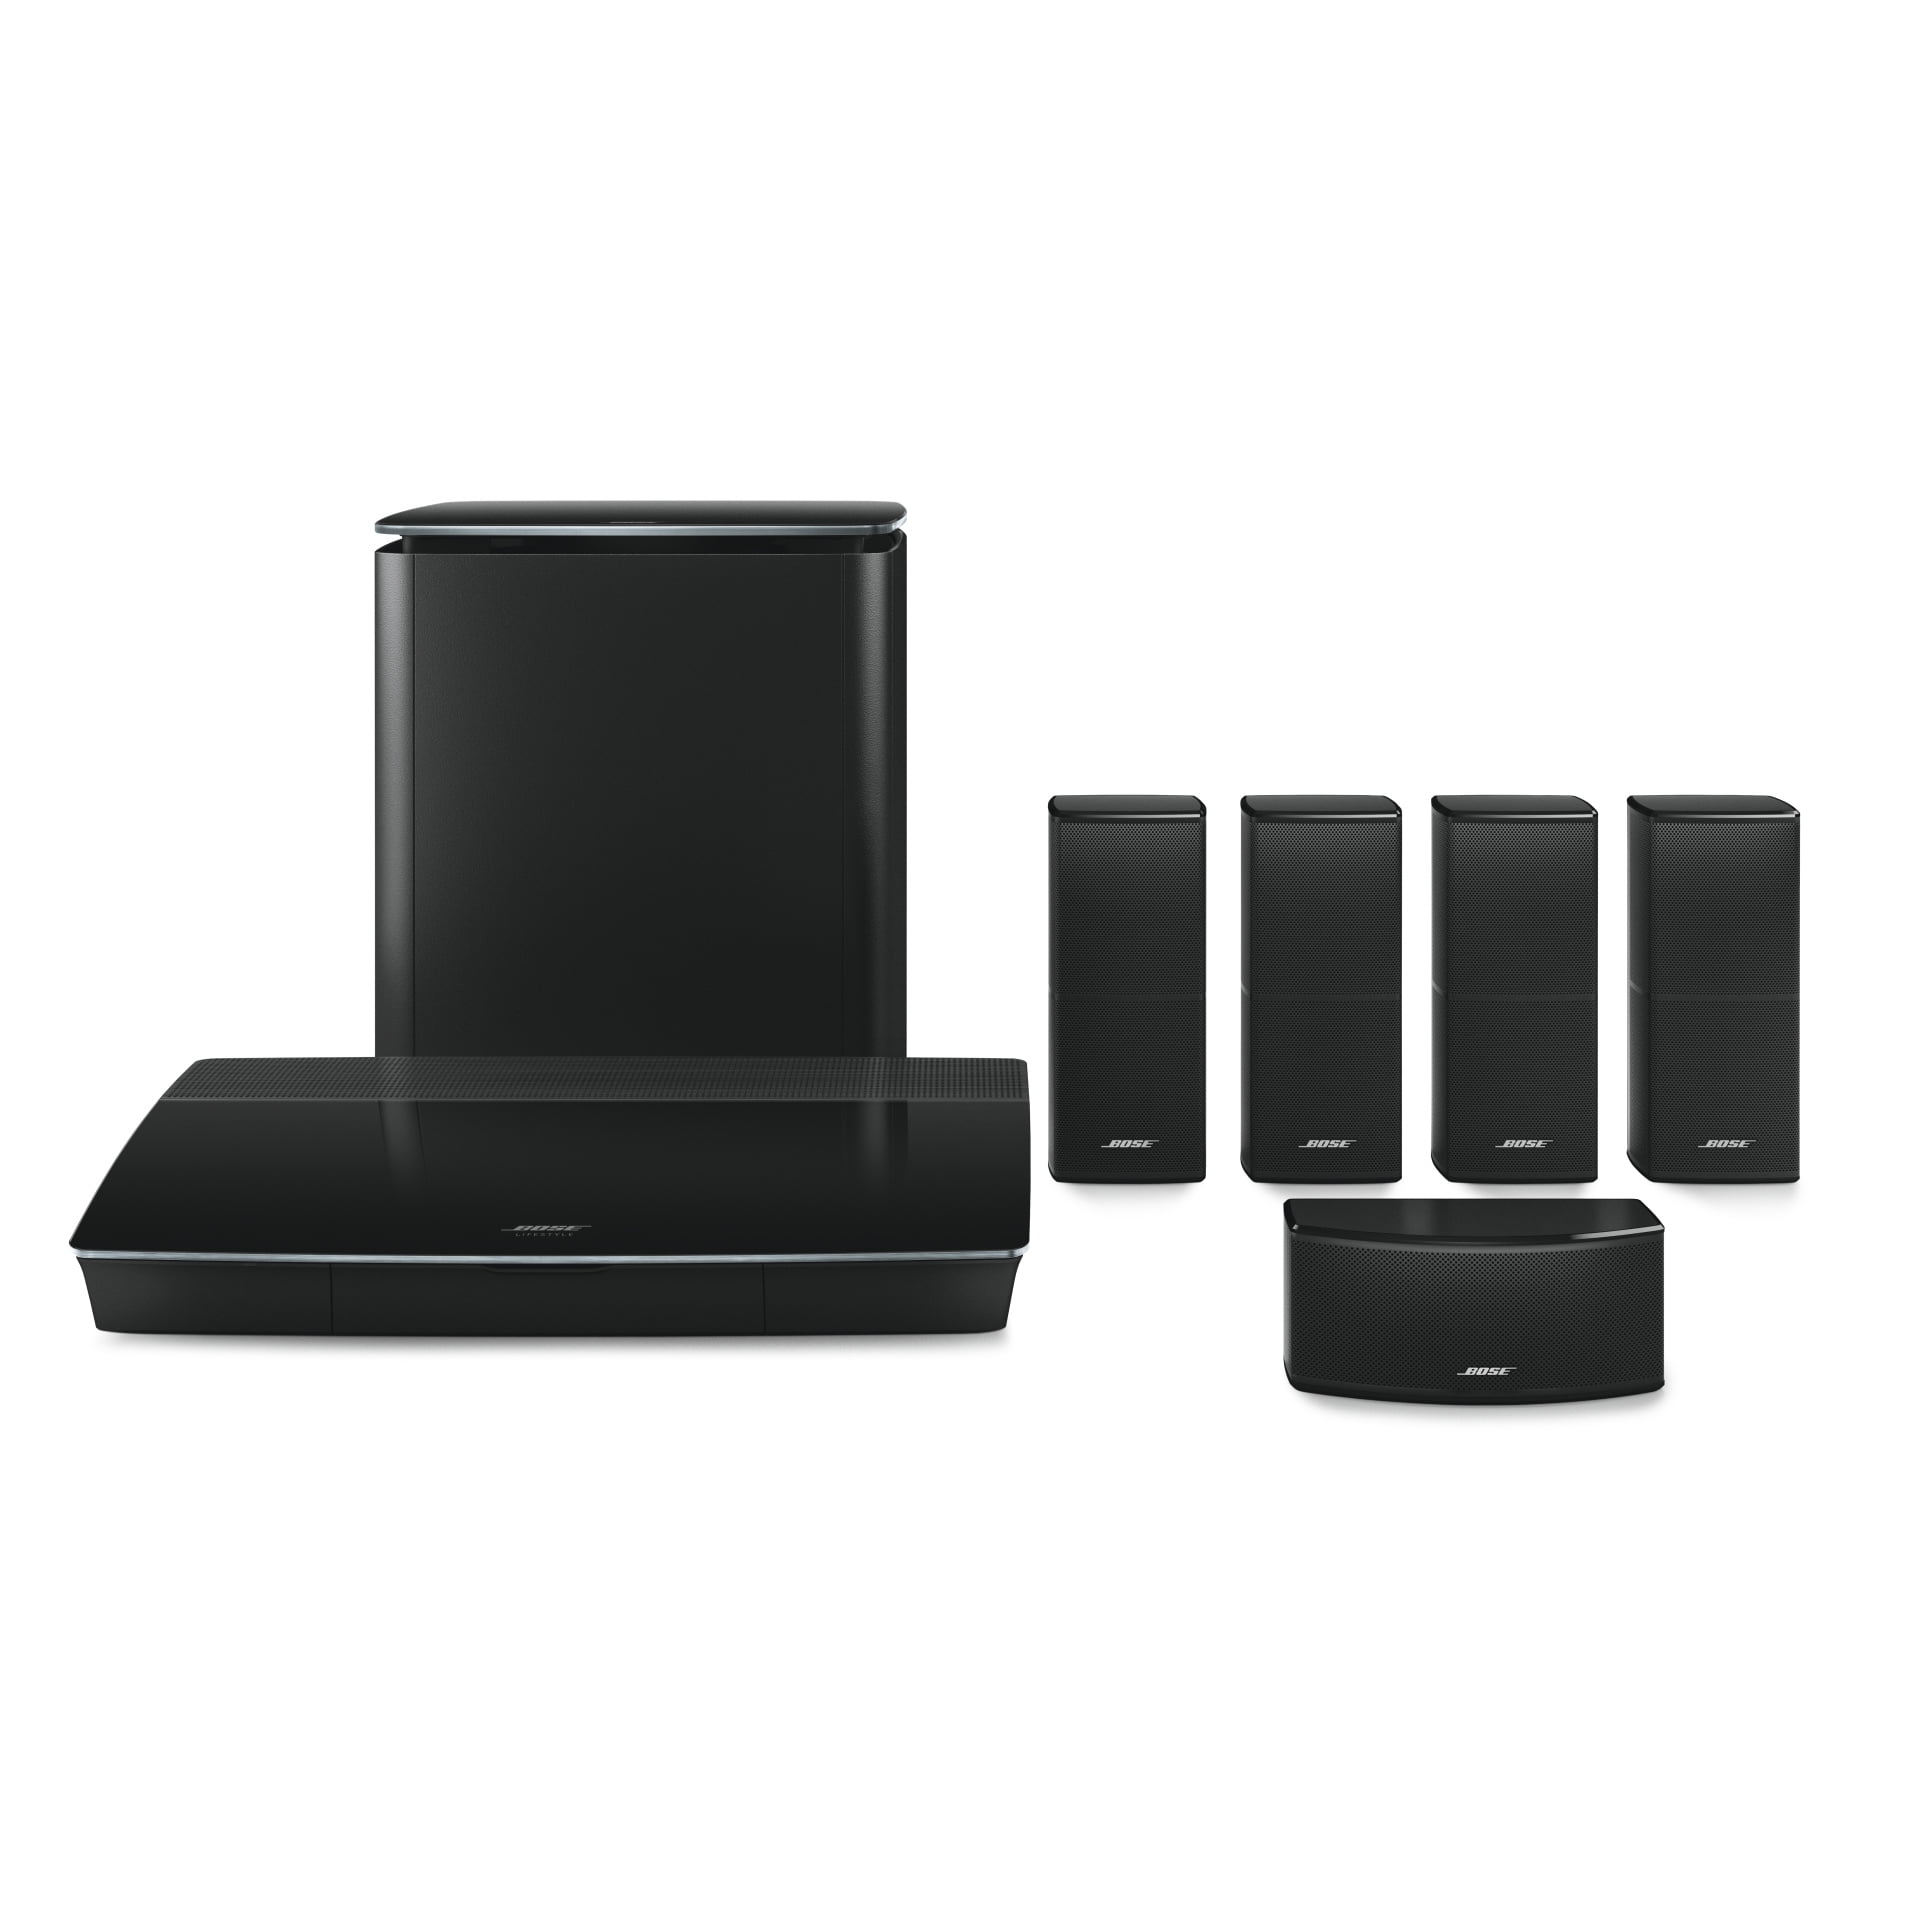 Bose Lifestyle 600 Home Theater Sound System Black